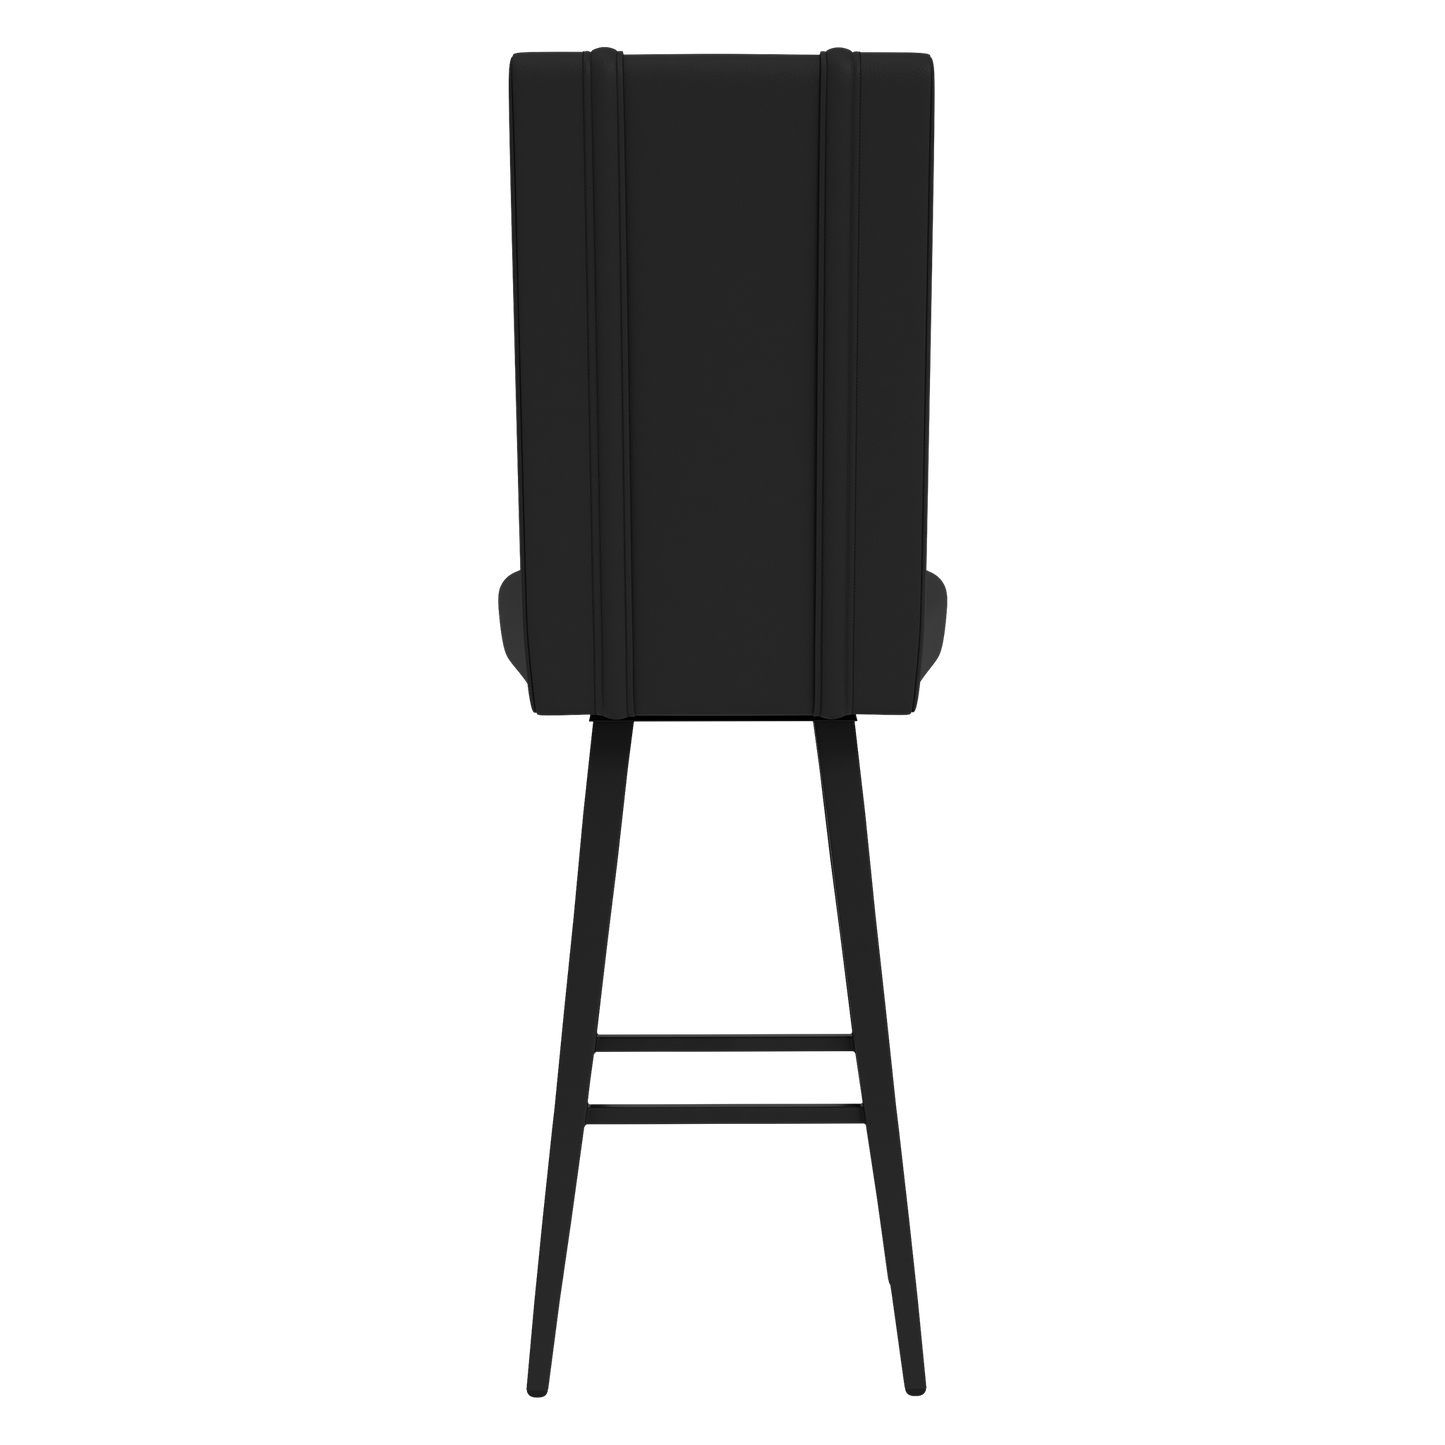 Swivel Bar Stool 2000 with Los Angeles Clippers Primary